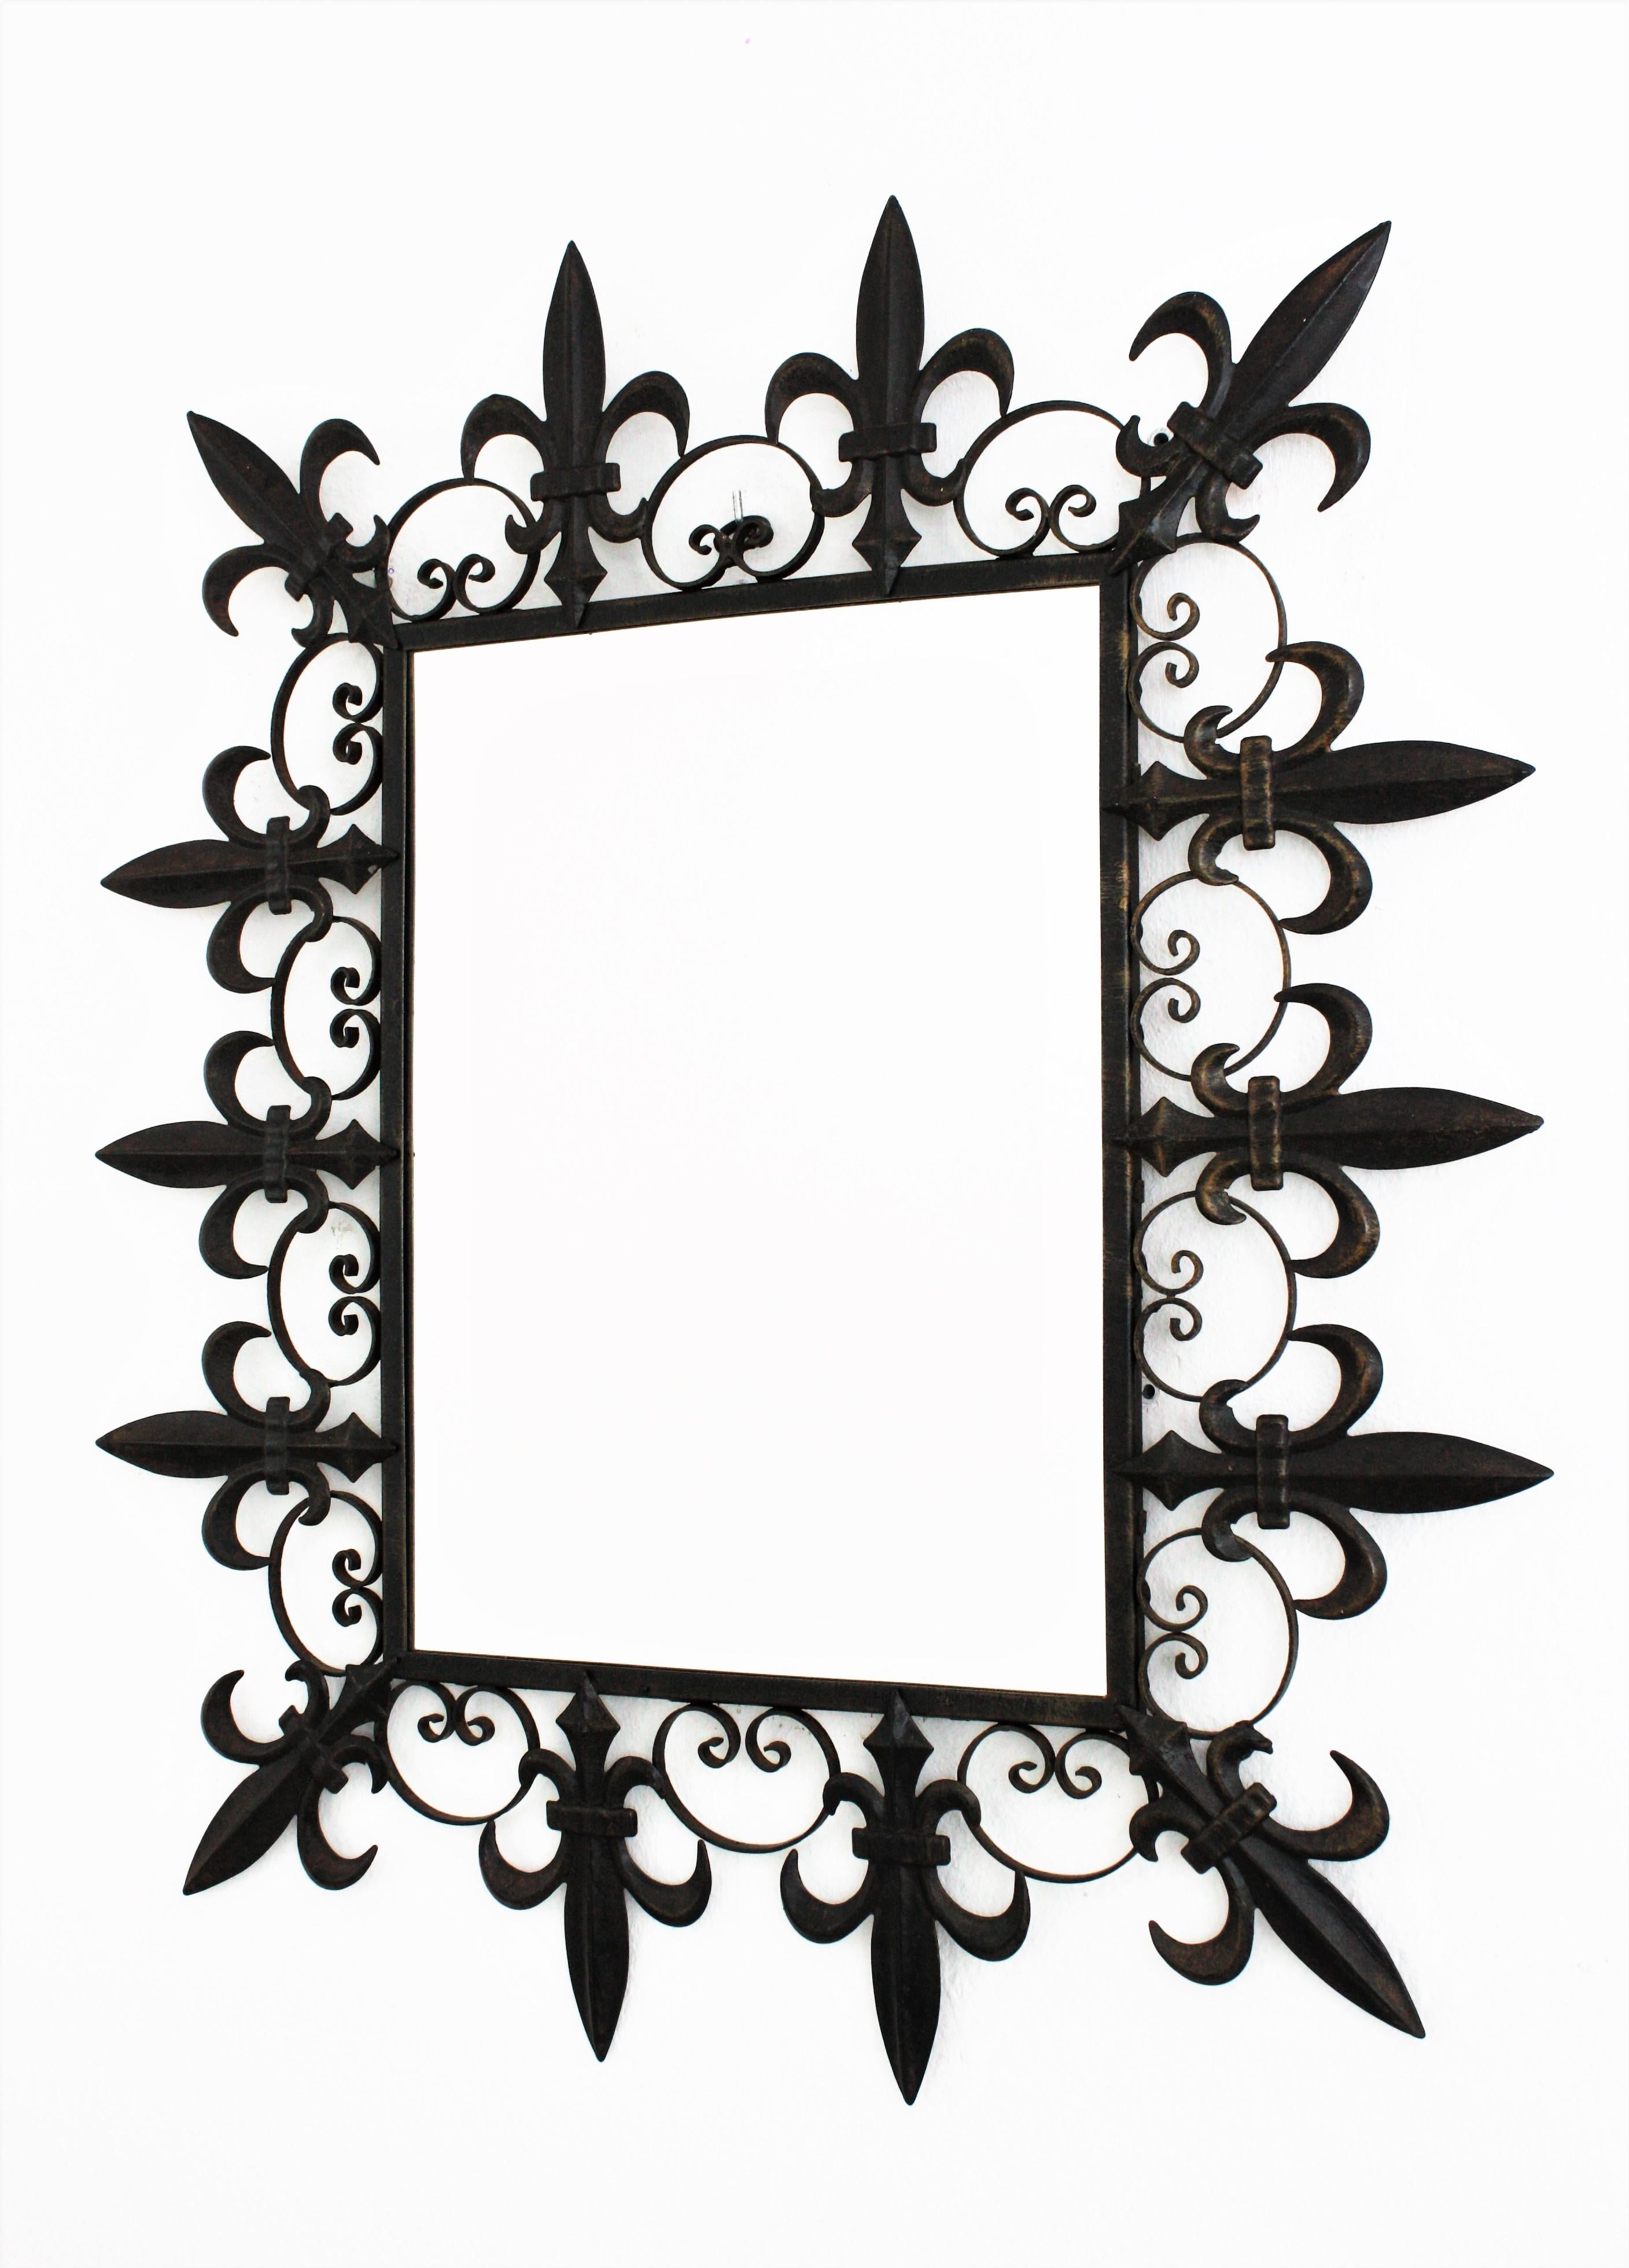 A hand-hammered iron wall mirror with fleur-de-lis and scroll motifs frame. France, 1930s
This mirror features a frame with alternating wrought iron fleur de lys and scroll details. It retains soft rests of its antique gold leaf gilding and has a